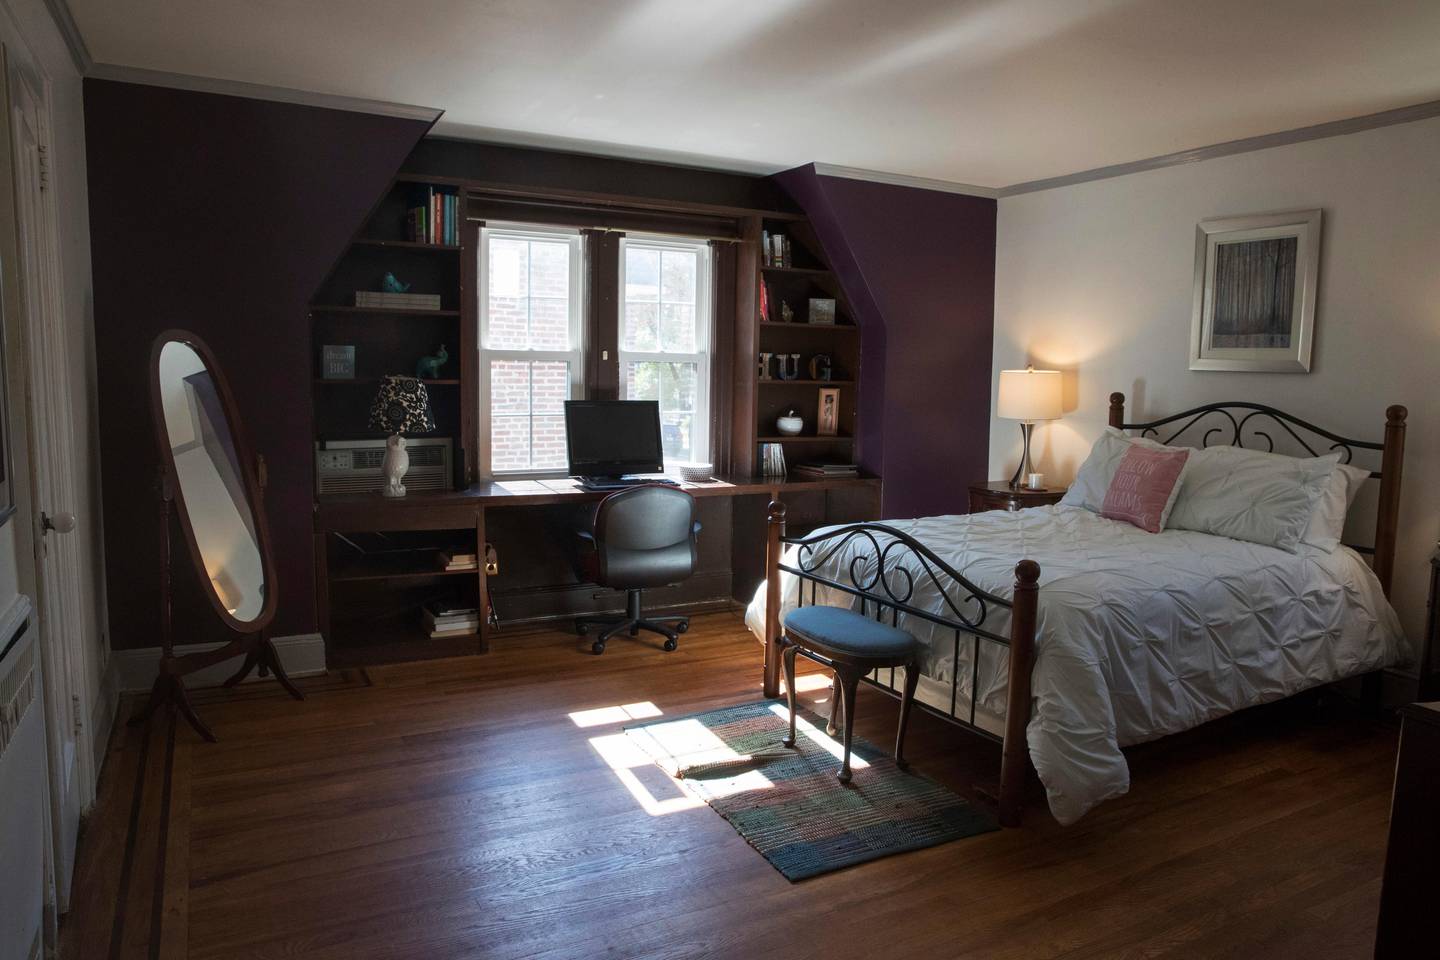 This Tuesday, Oct. 18, 2016 photo, shows a bedroom in the house where Republican presidential candidate Donald Trump spent his early childhood in the Jamaica Estates neighborhood of the Queens borough of New York. Trump?Äôs first boyhood home in New York City is going on the auction block with an opening bid of $849,000. (AP Photo/Mary Altaffer)